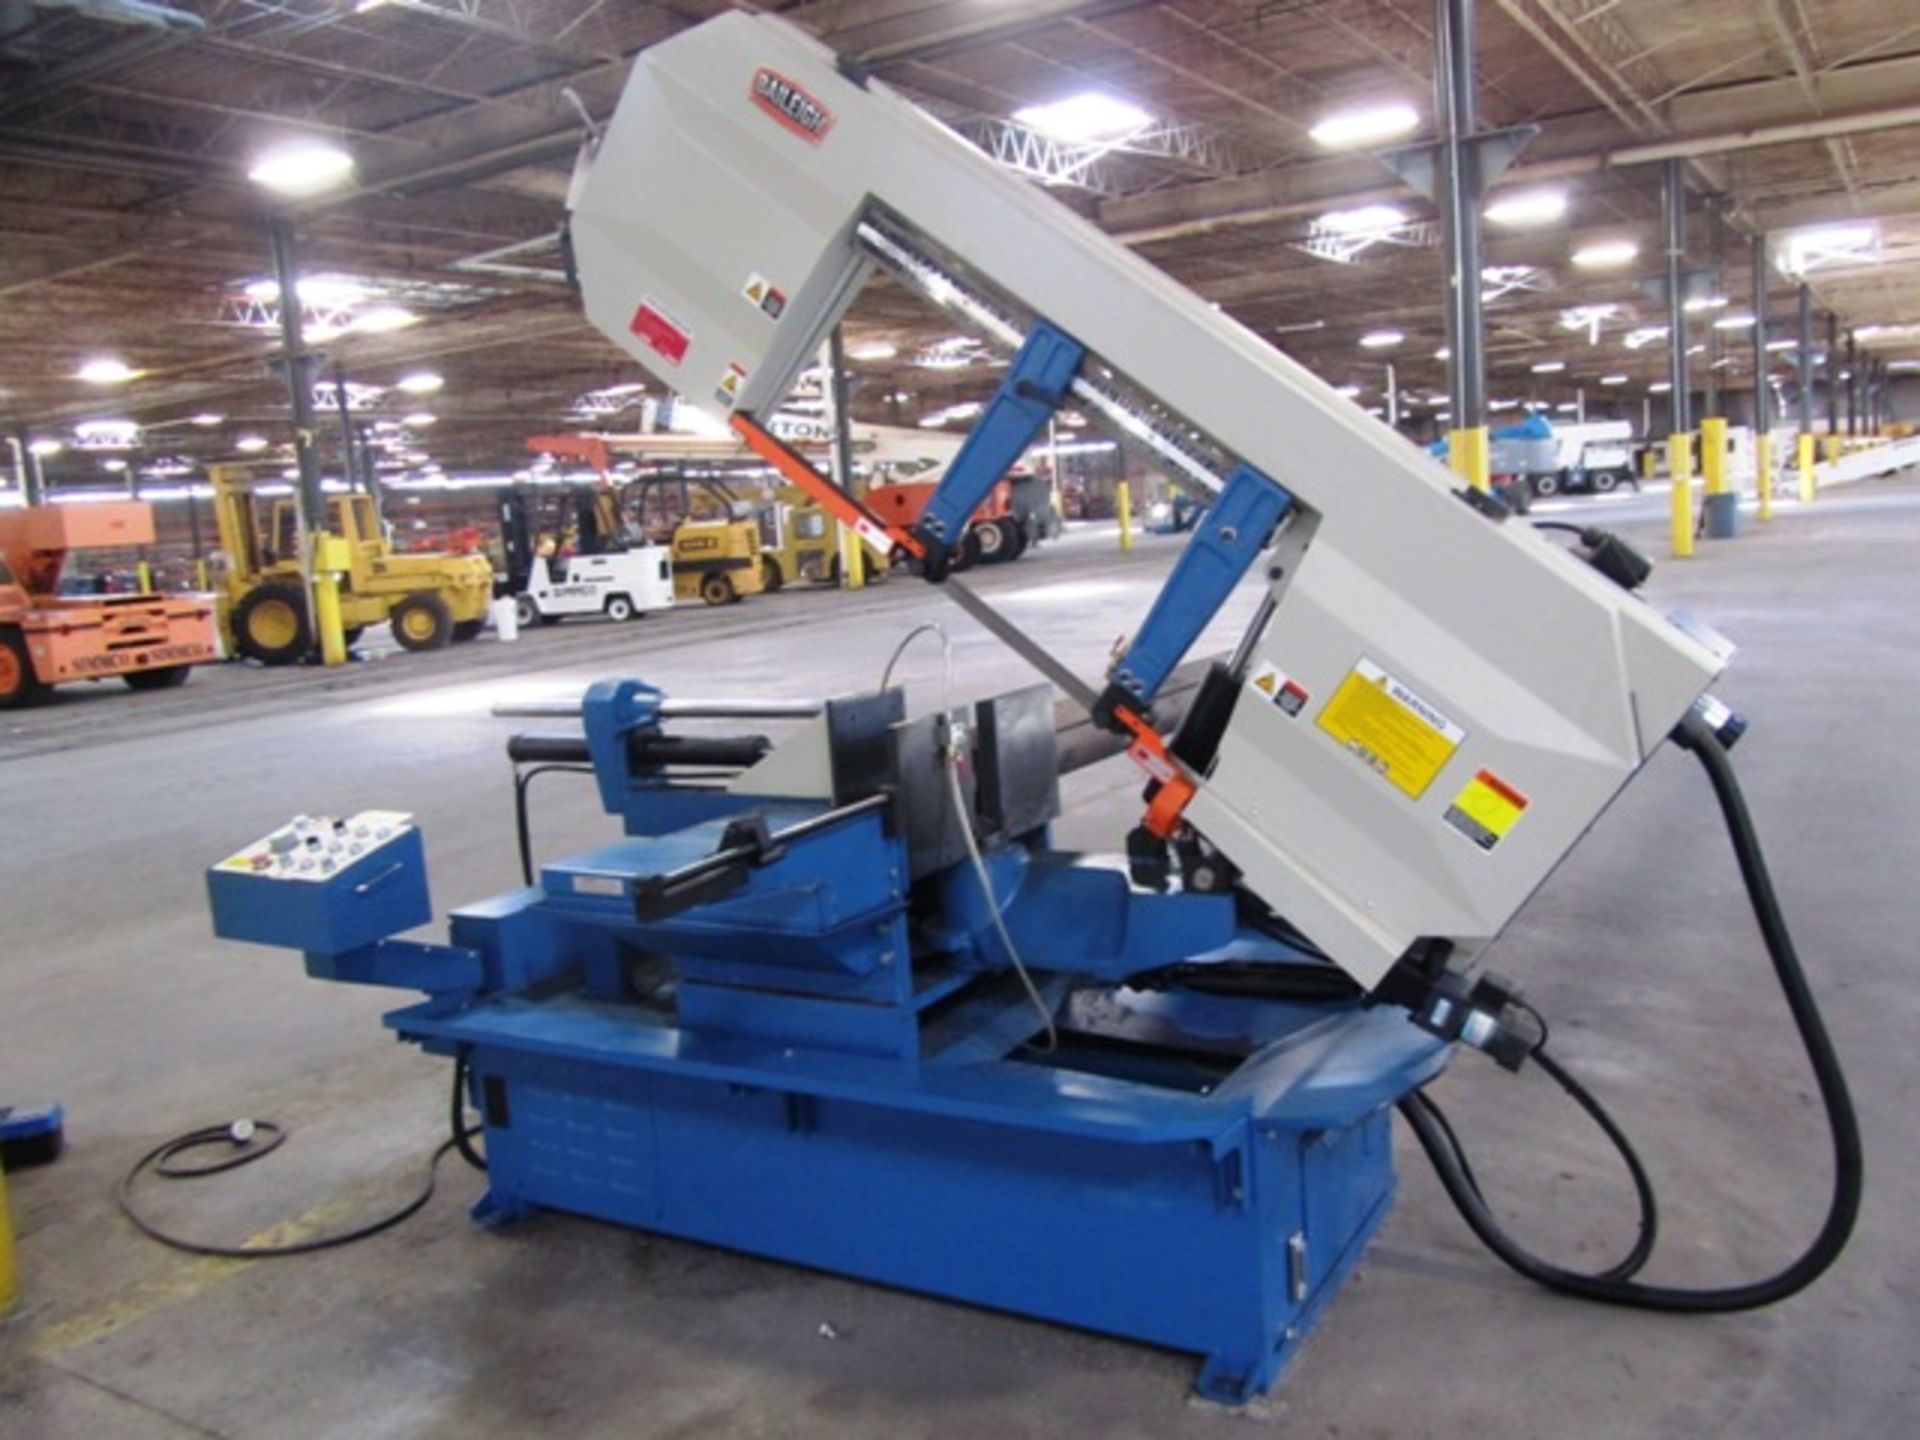 Baileigh Model BS-24SA-DM Semi-Automatic Bandsaw with 18'' Round Capacity, Dual Mitre Cuts to 60 - Image 3 of 3